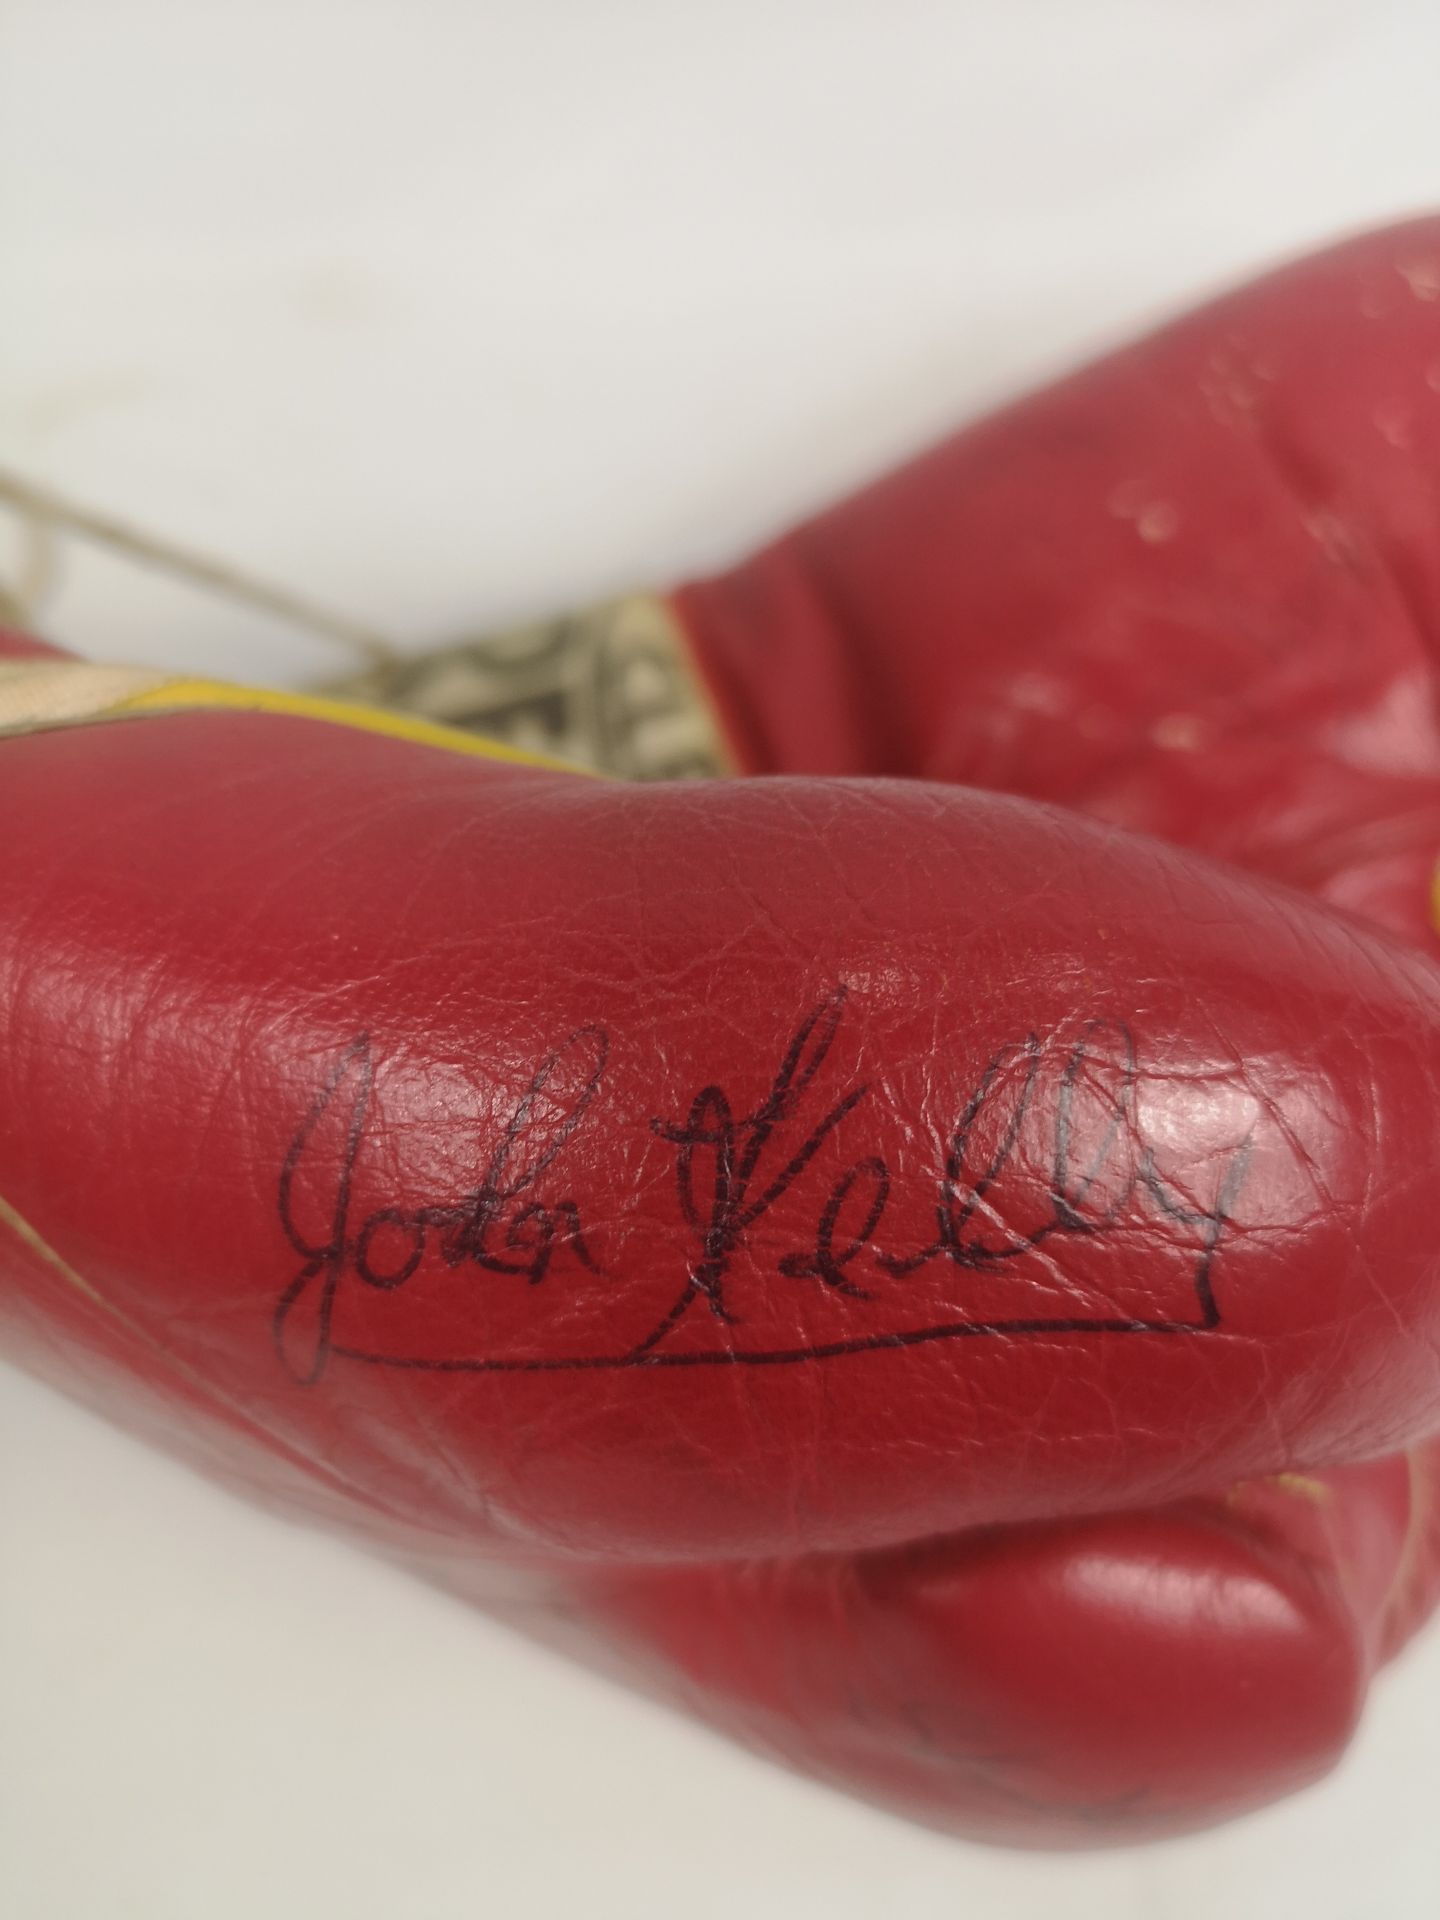 Pair of signed Cleto Reyes boxing gloves with approximately 17 signatures. - Image 4 of 9